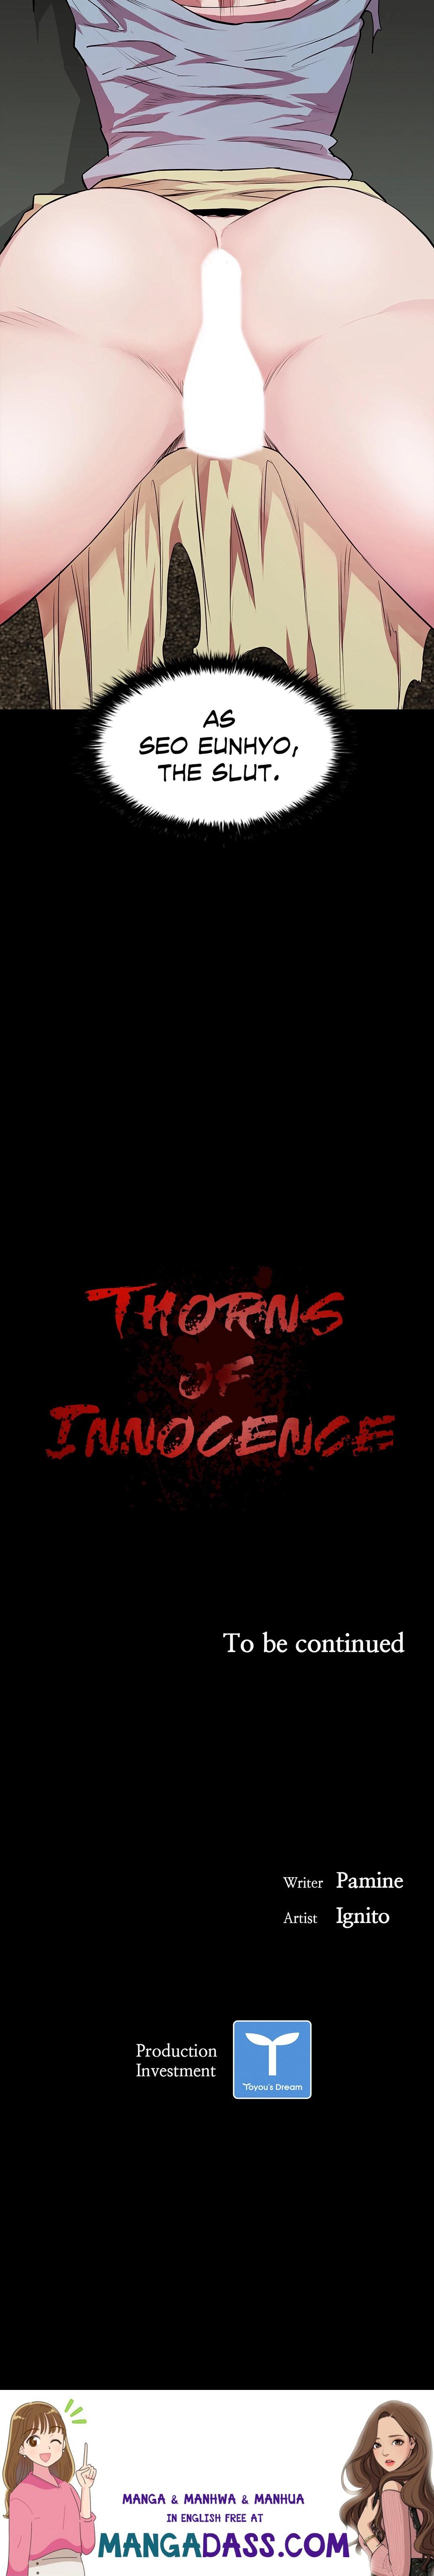 Thorns on Innocence - Chapter 20 Page 35